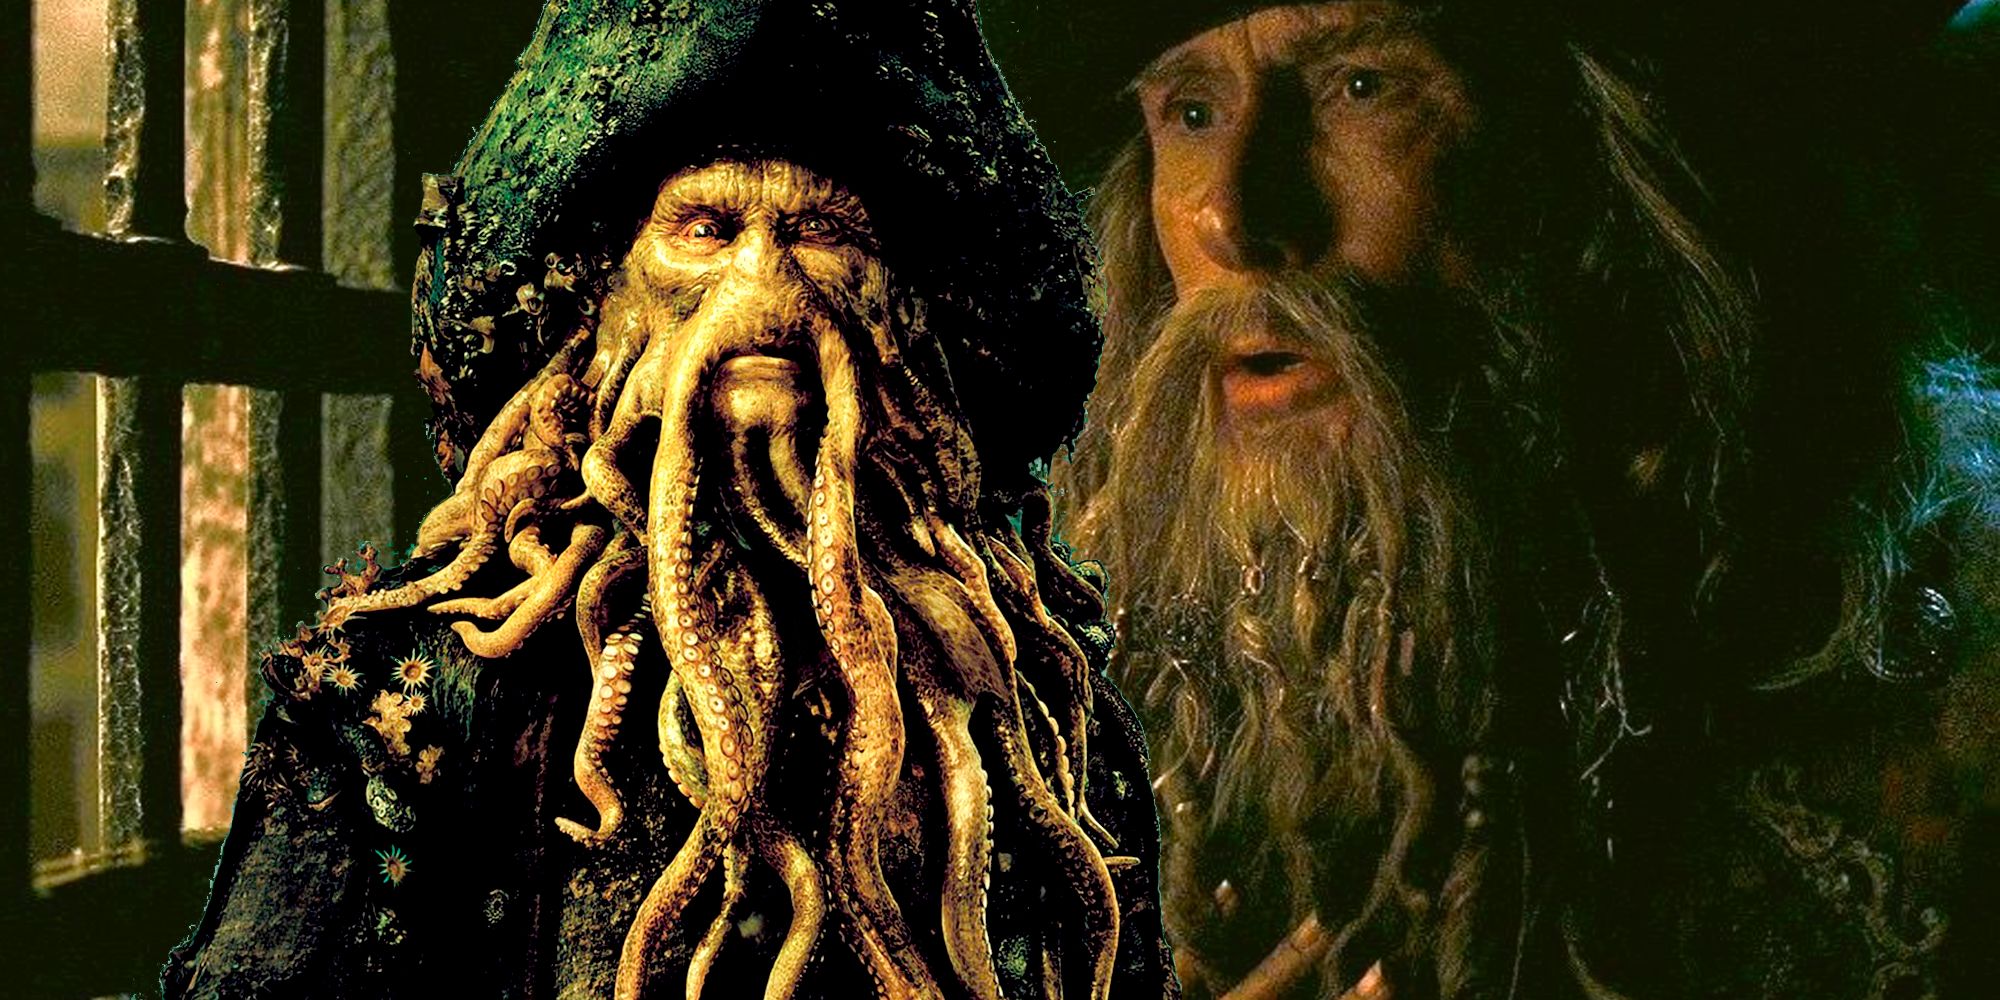 Actor Bill Nighy as Davy Jones the Captain of the Flying Dutchman in Pirates of the Caribbean